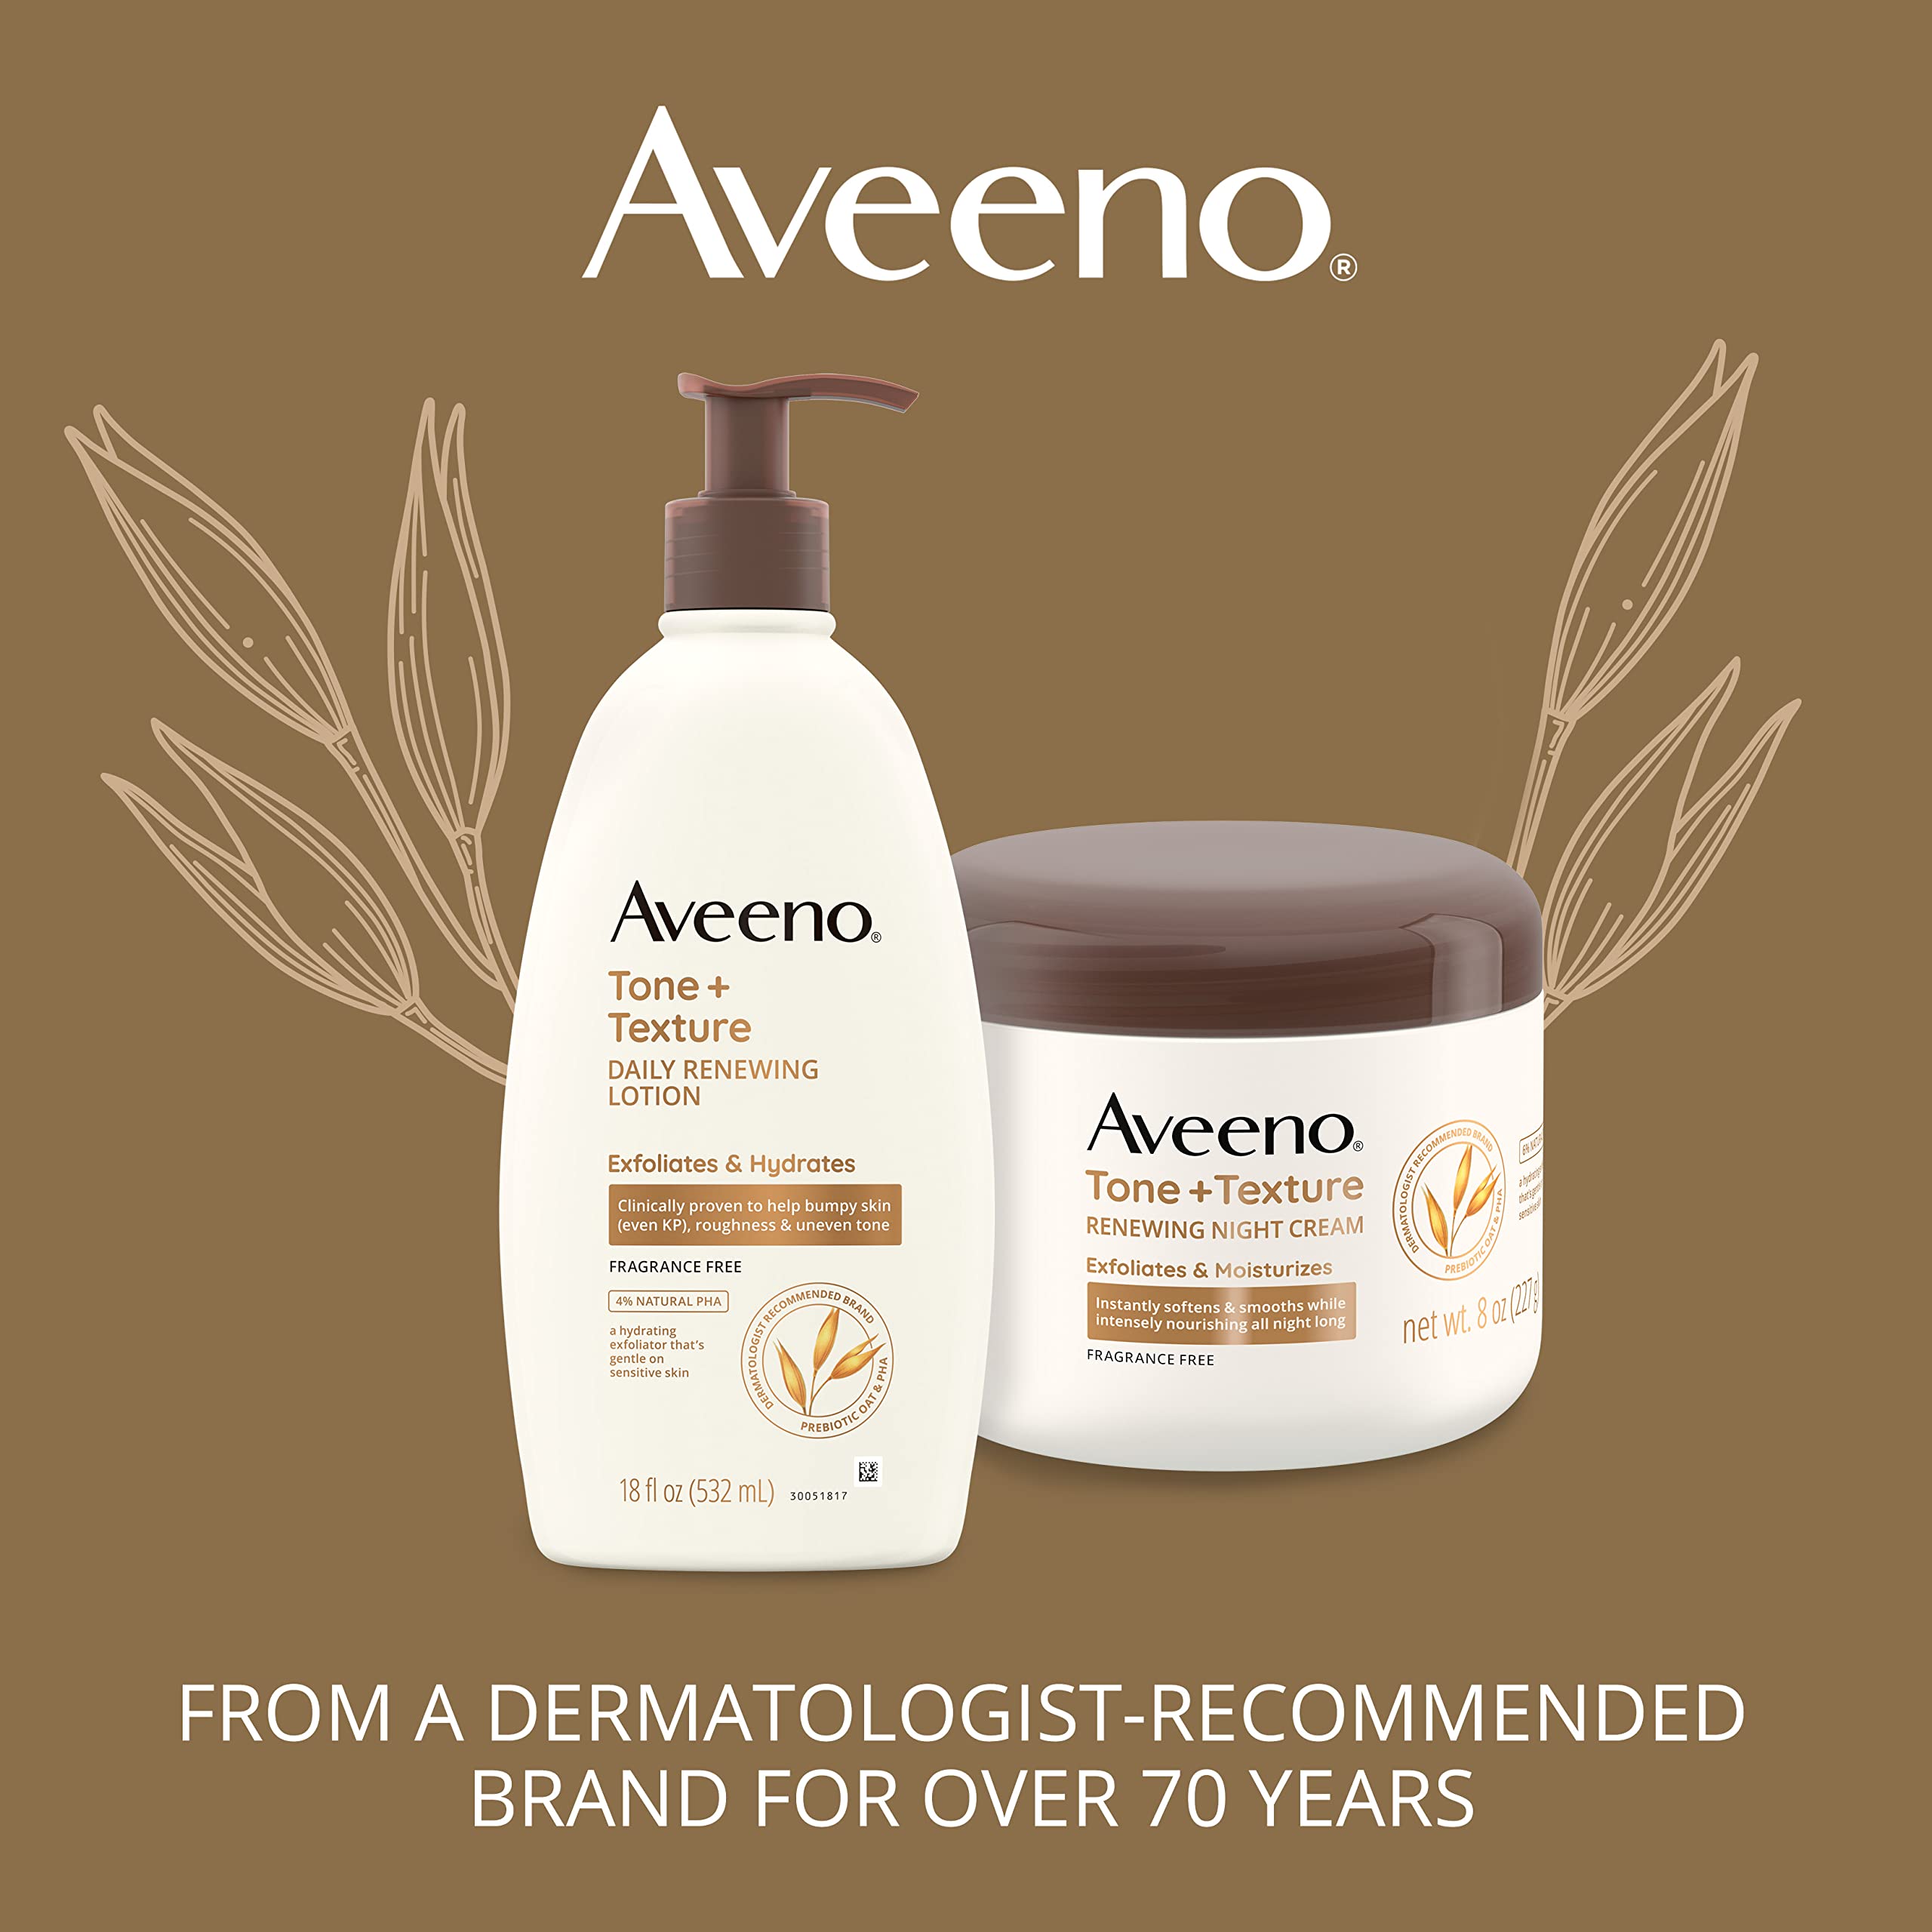 Aveeno Tone + Texture Renewing Night Cream With Prebiotic Oat, Gentle Cream Exfoliates & Moisturizes Sensitive Skin, Instantly Softens & Smooths & Intensely Nourishes, Fragrance-Free, 8 Oz